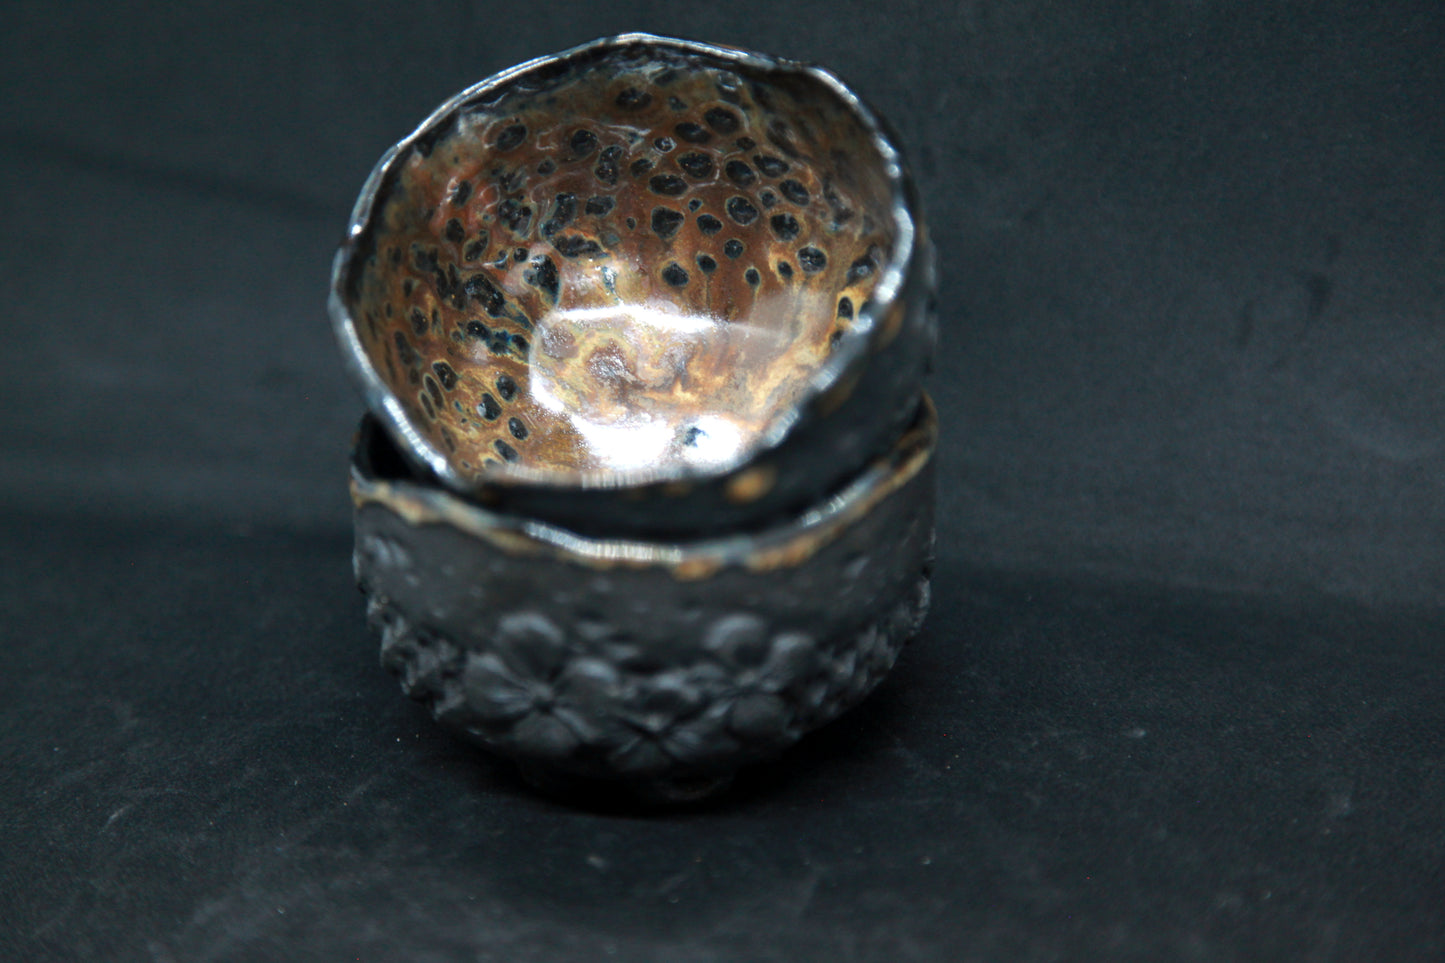 Amber cups on black clay - flower patterns